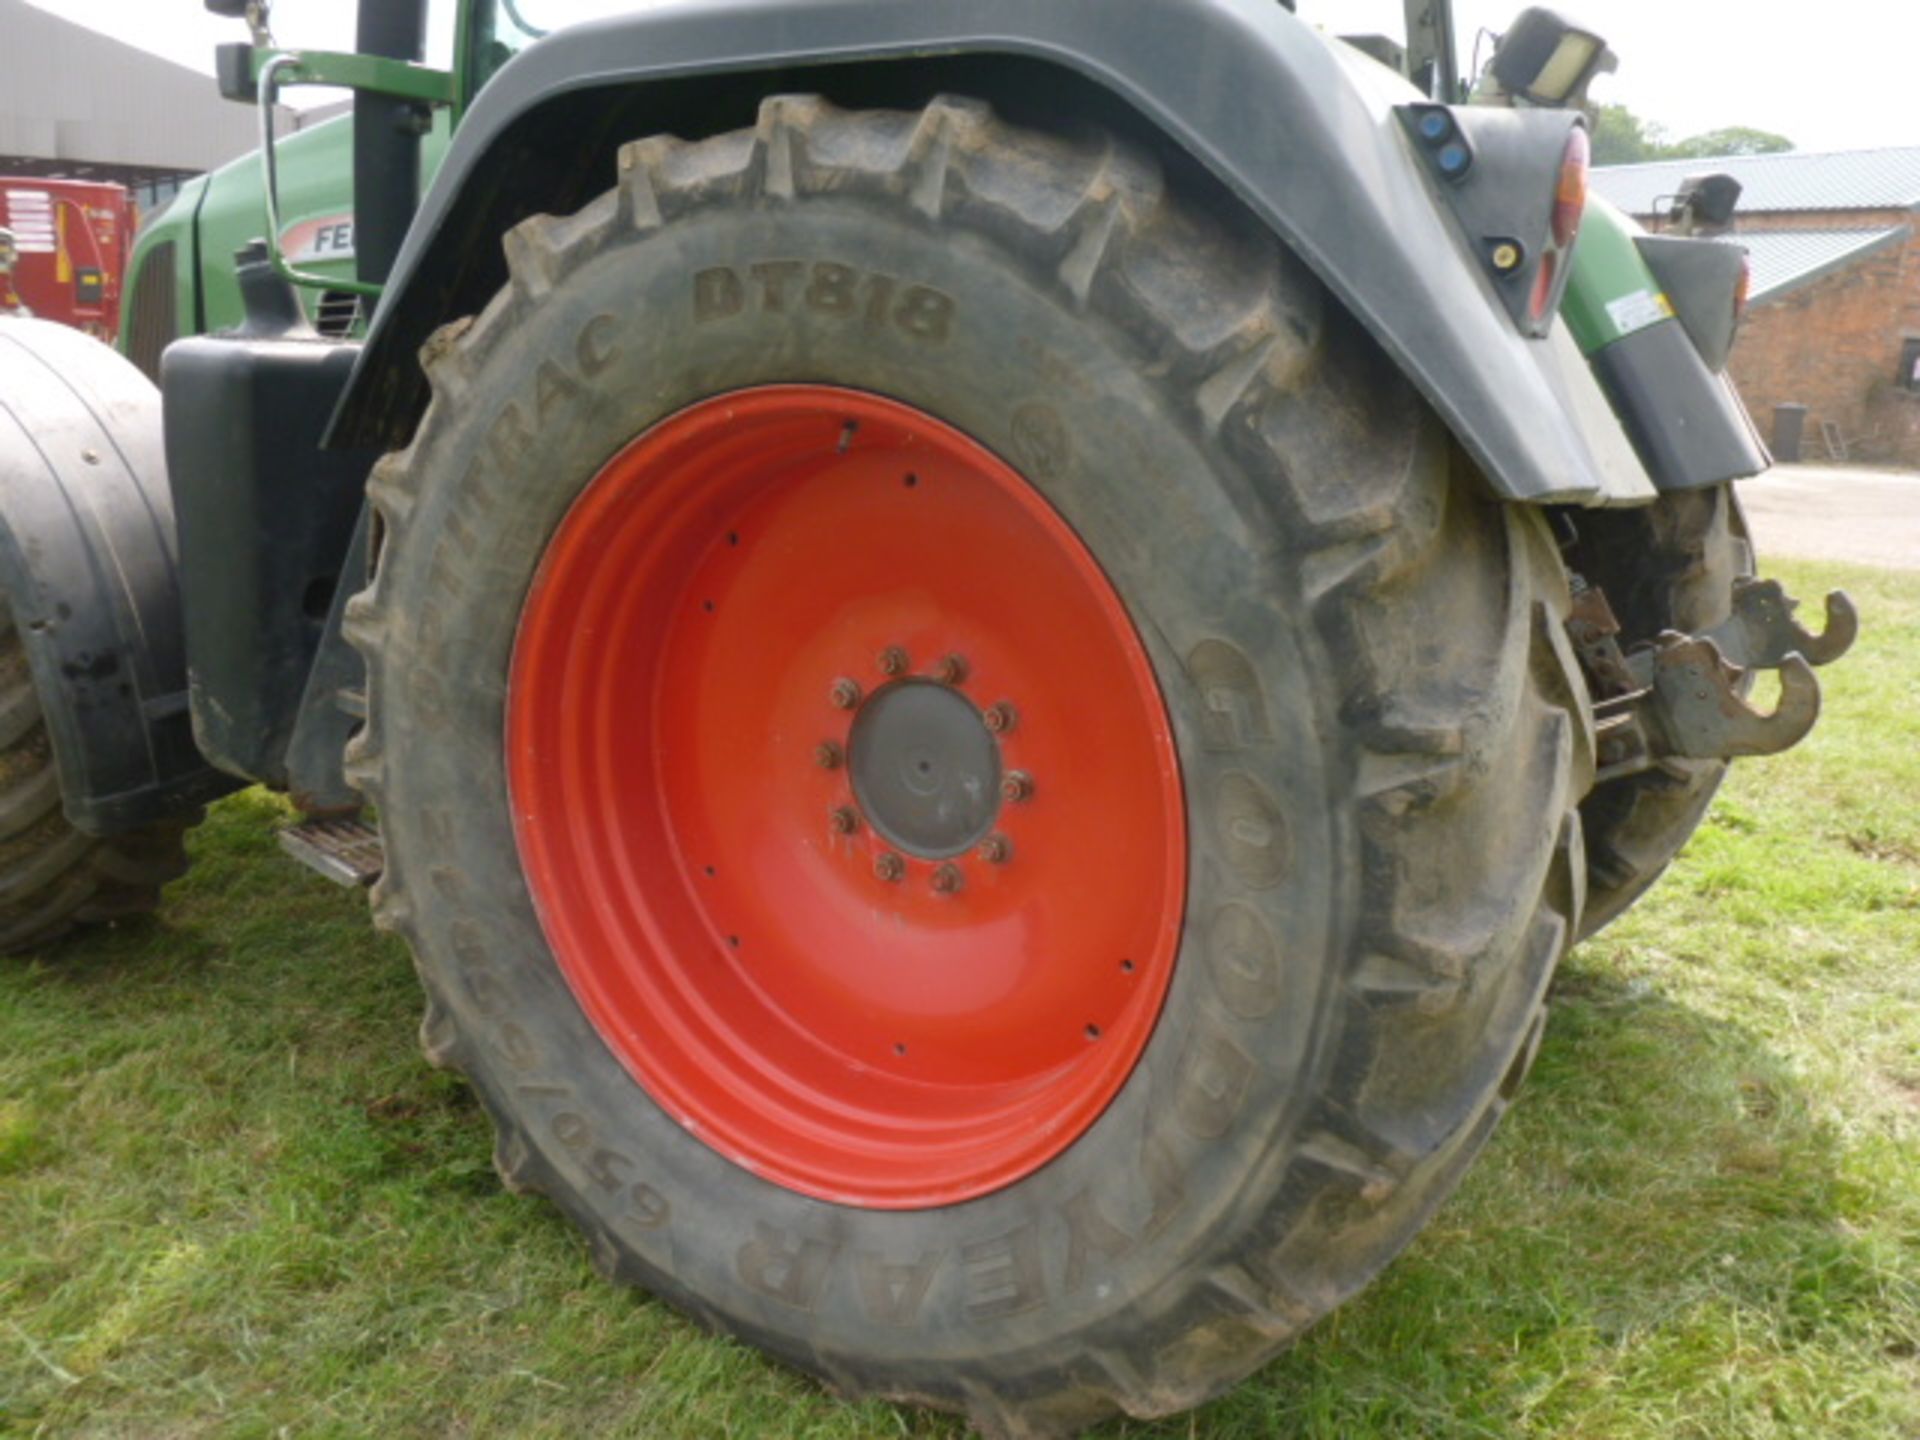 FENDT 718 VARIO TMS TRACTOR (7305)HOURS C/W FRONT WEIGHT 1260KG REG DX08 NHN ONE OWNER FROM NEW - Image 4 of 10